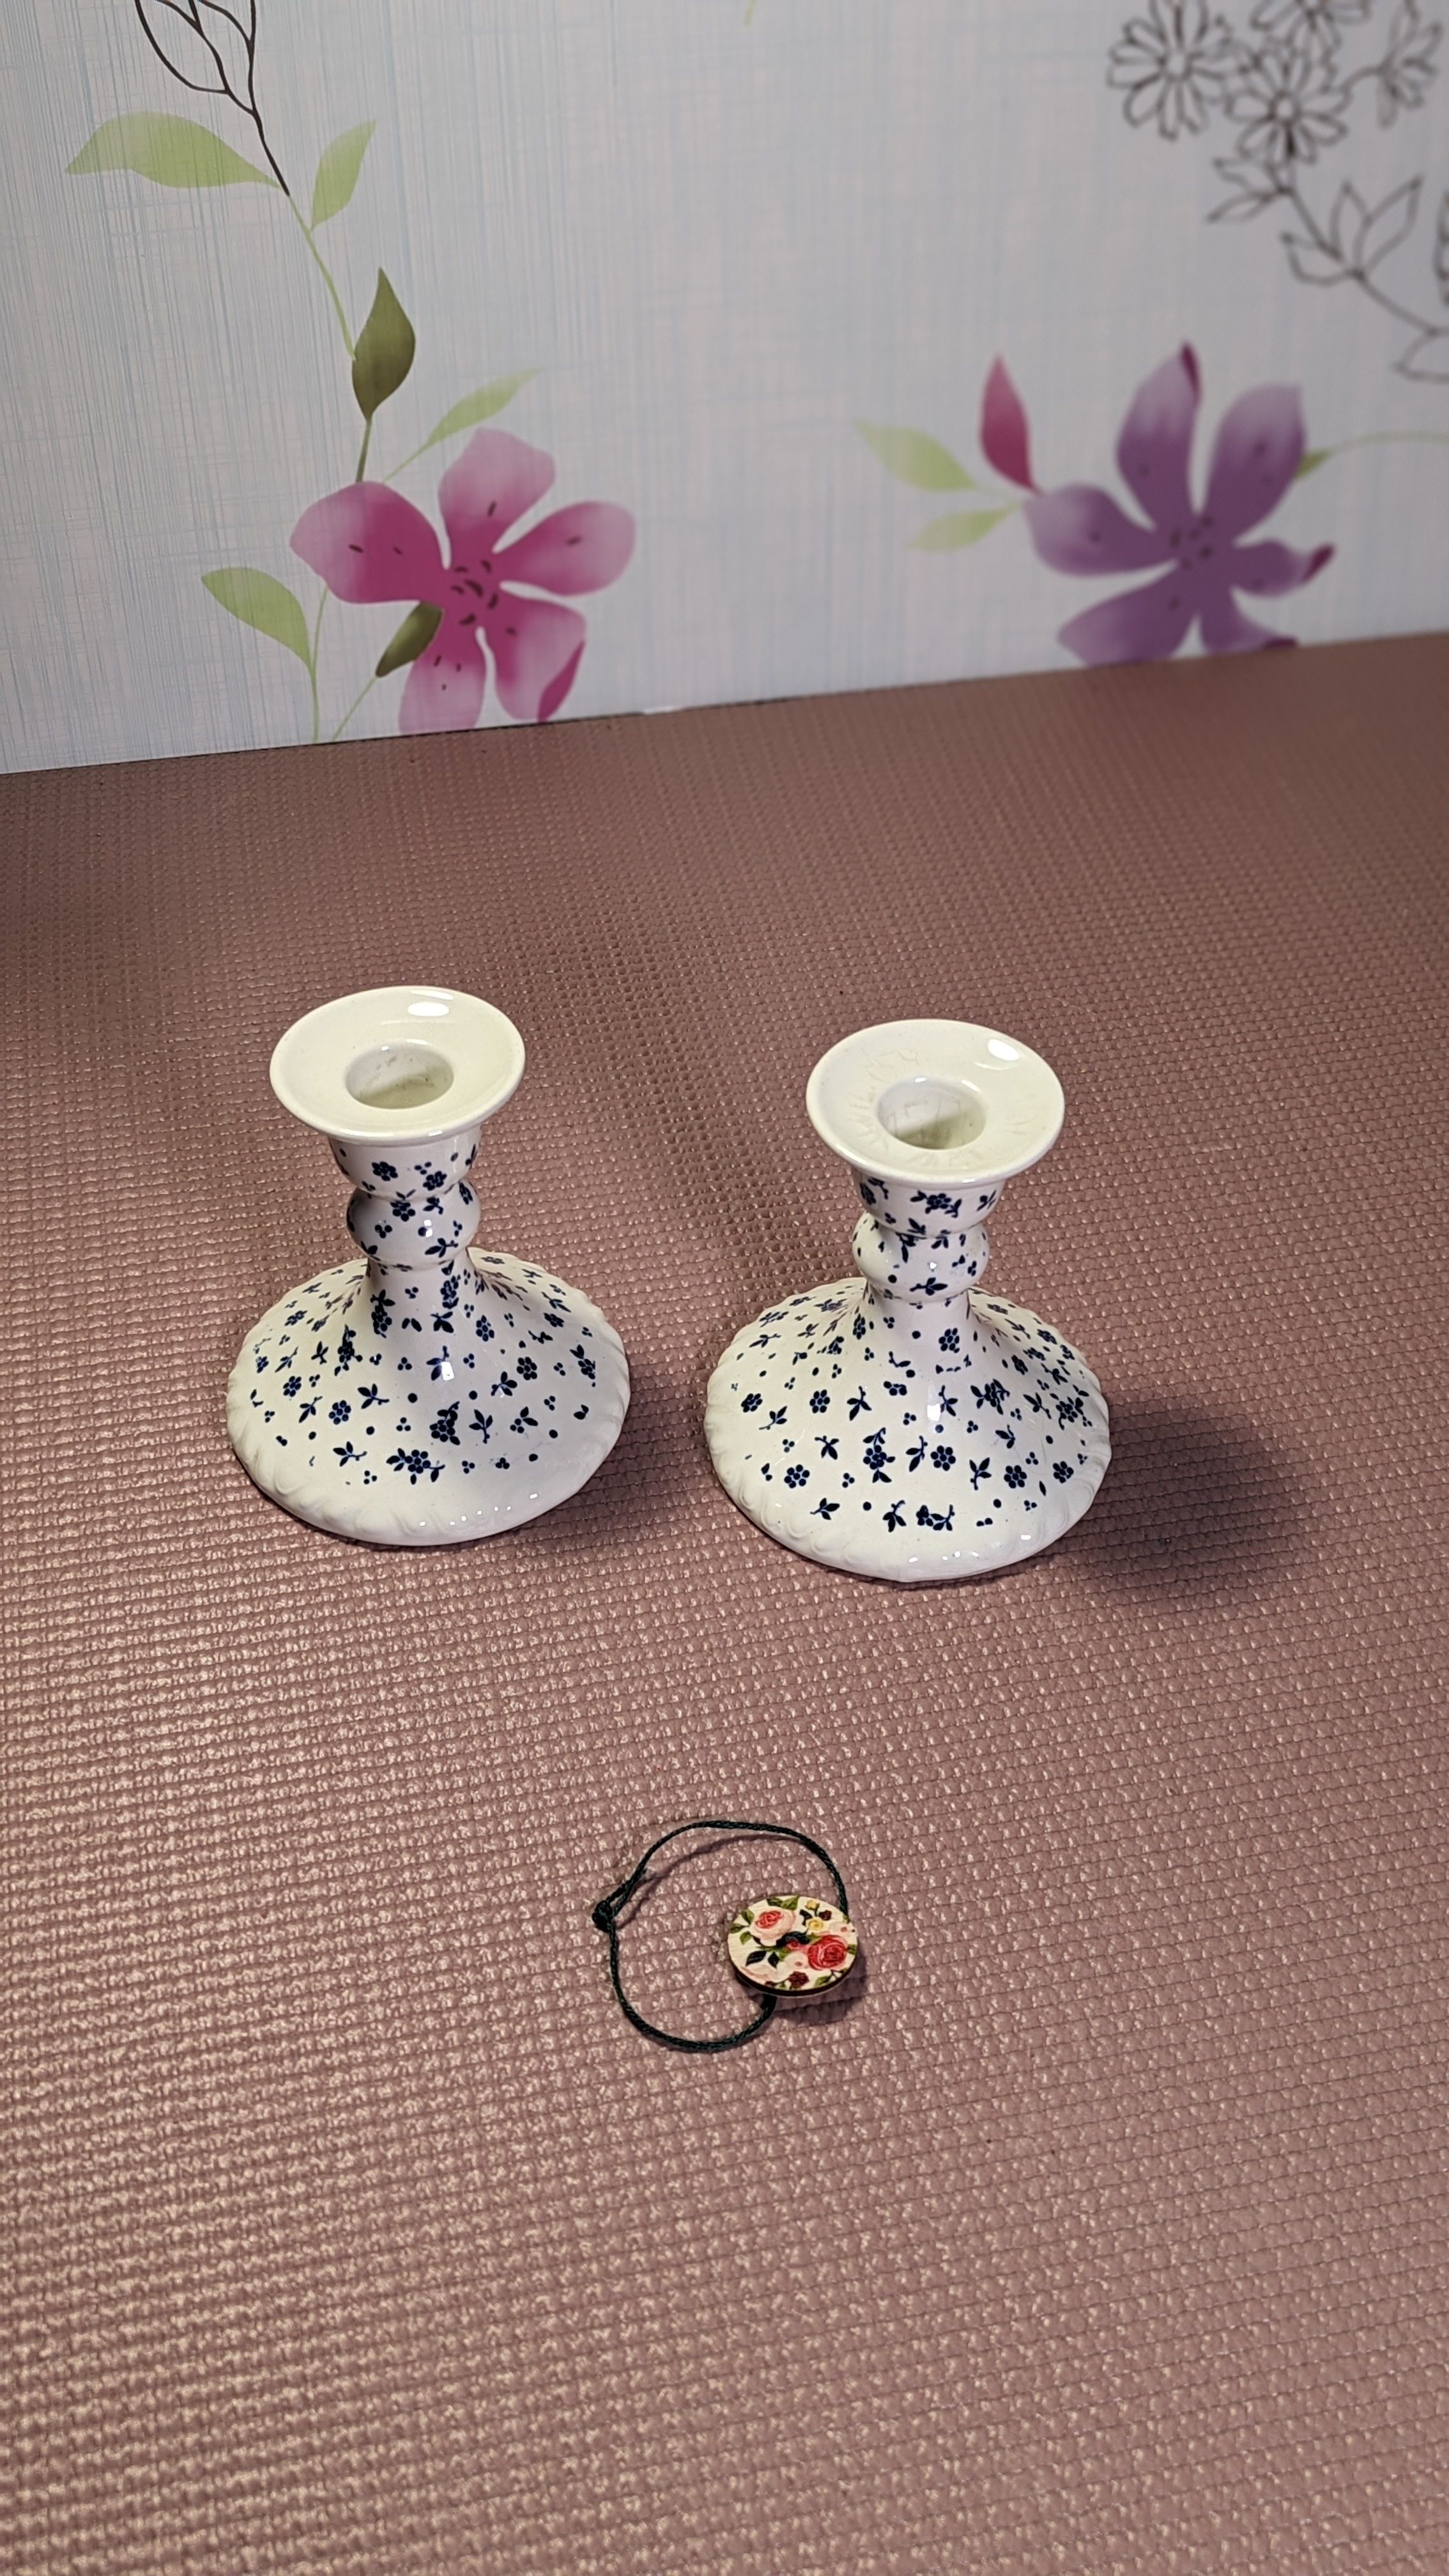 ADAMS ware Candle Stick Holders - White with Blue Daisy 1970s